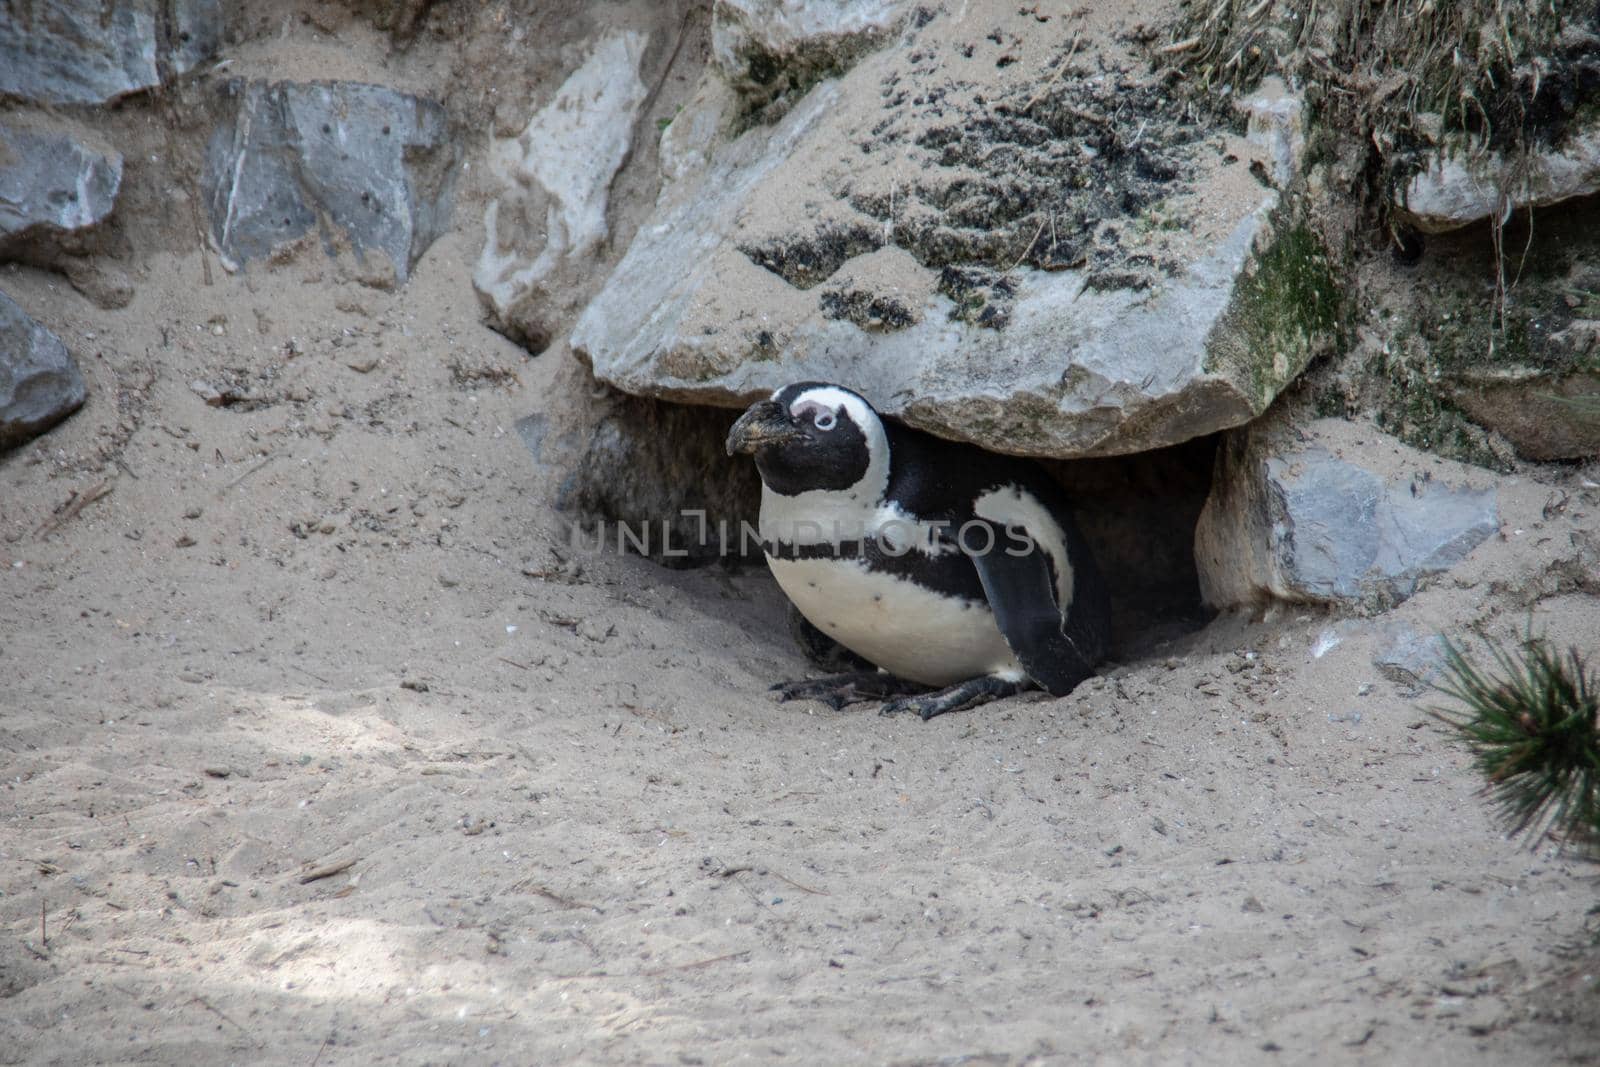 Penguins in a colony in the sand under rocks